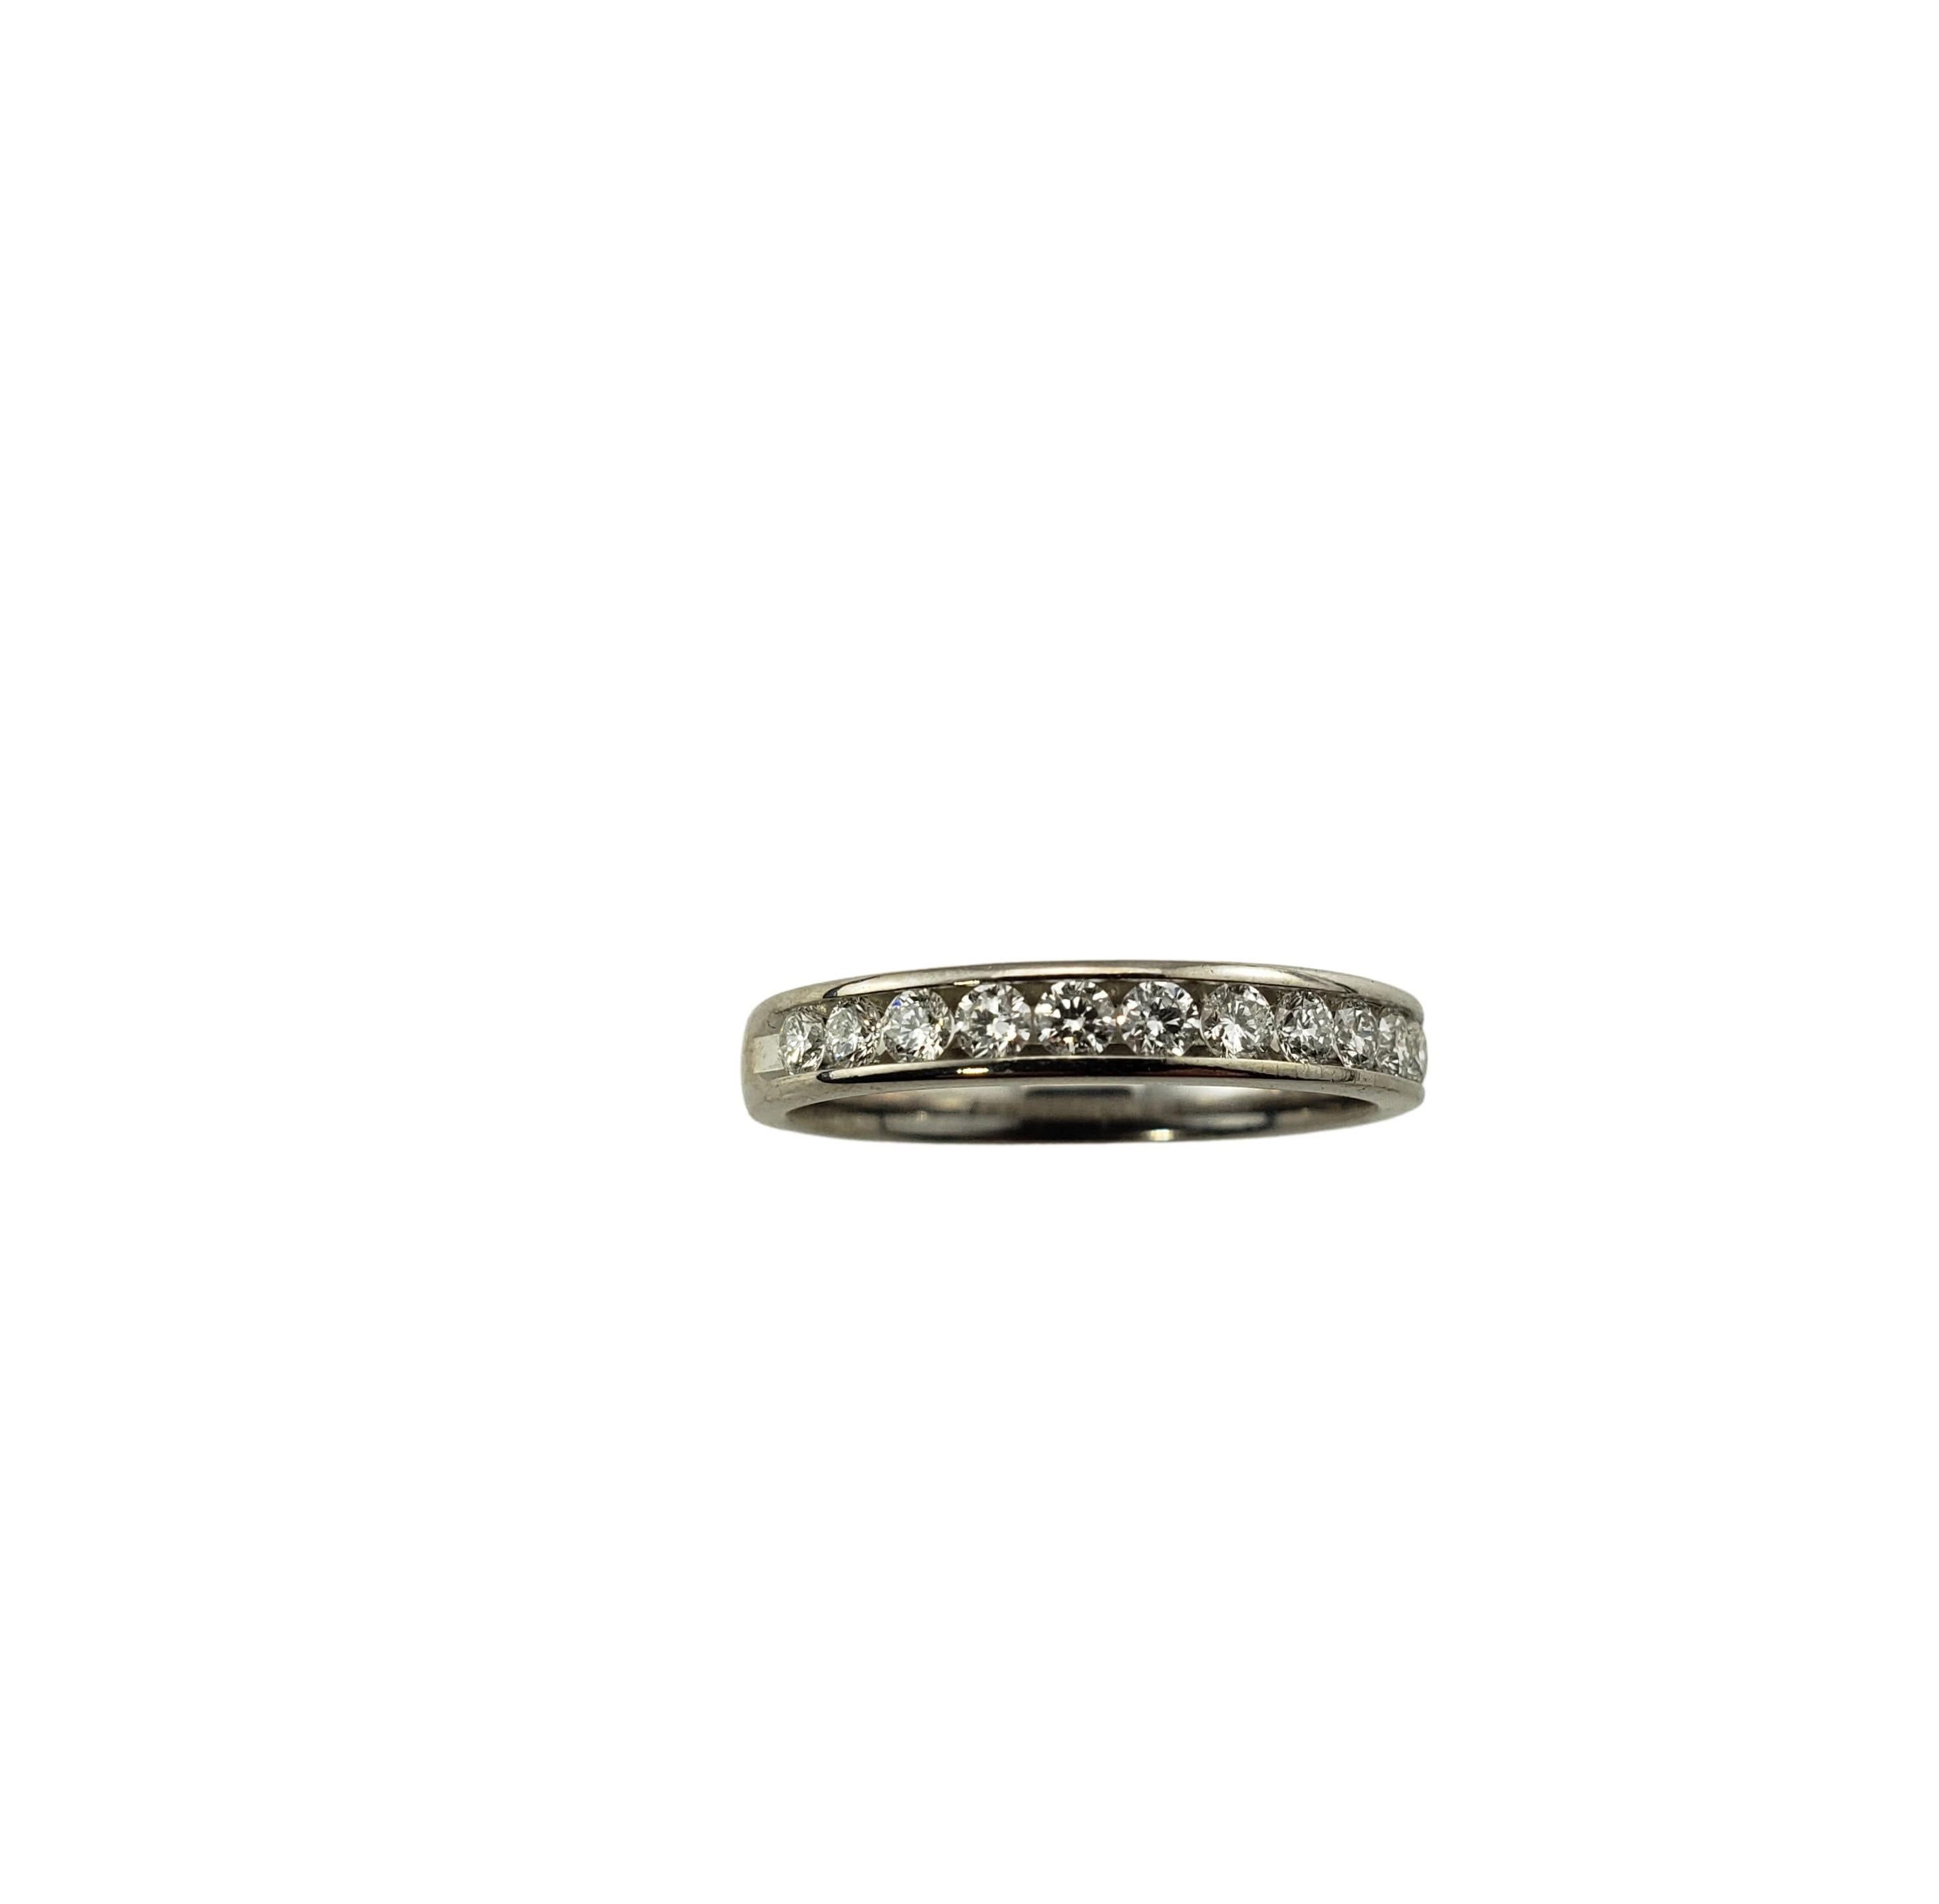 Vintage 14 Karat White Gold and Diamond Wedding Band Ring Size 5-

This sparkling band features 11 round brilliant cut diamonds set in classic 14K white gold.  Width: 3 mm.

Approximate total diamond weight:  .33 ct.

Diamond color:  G

Diamond